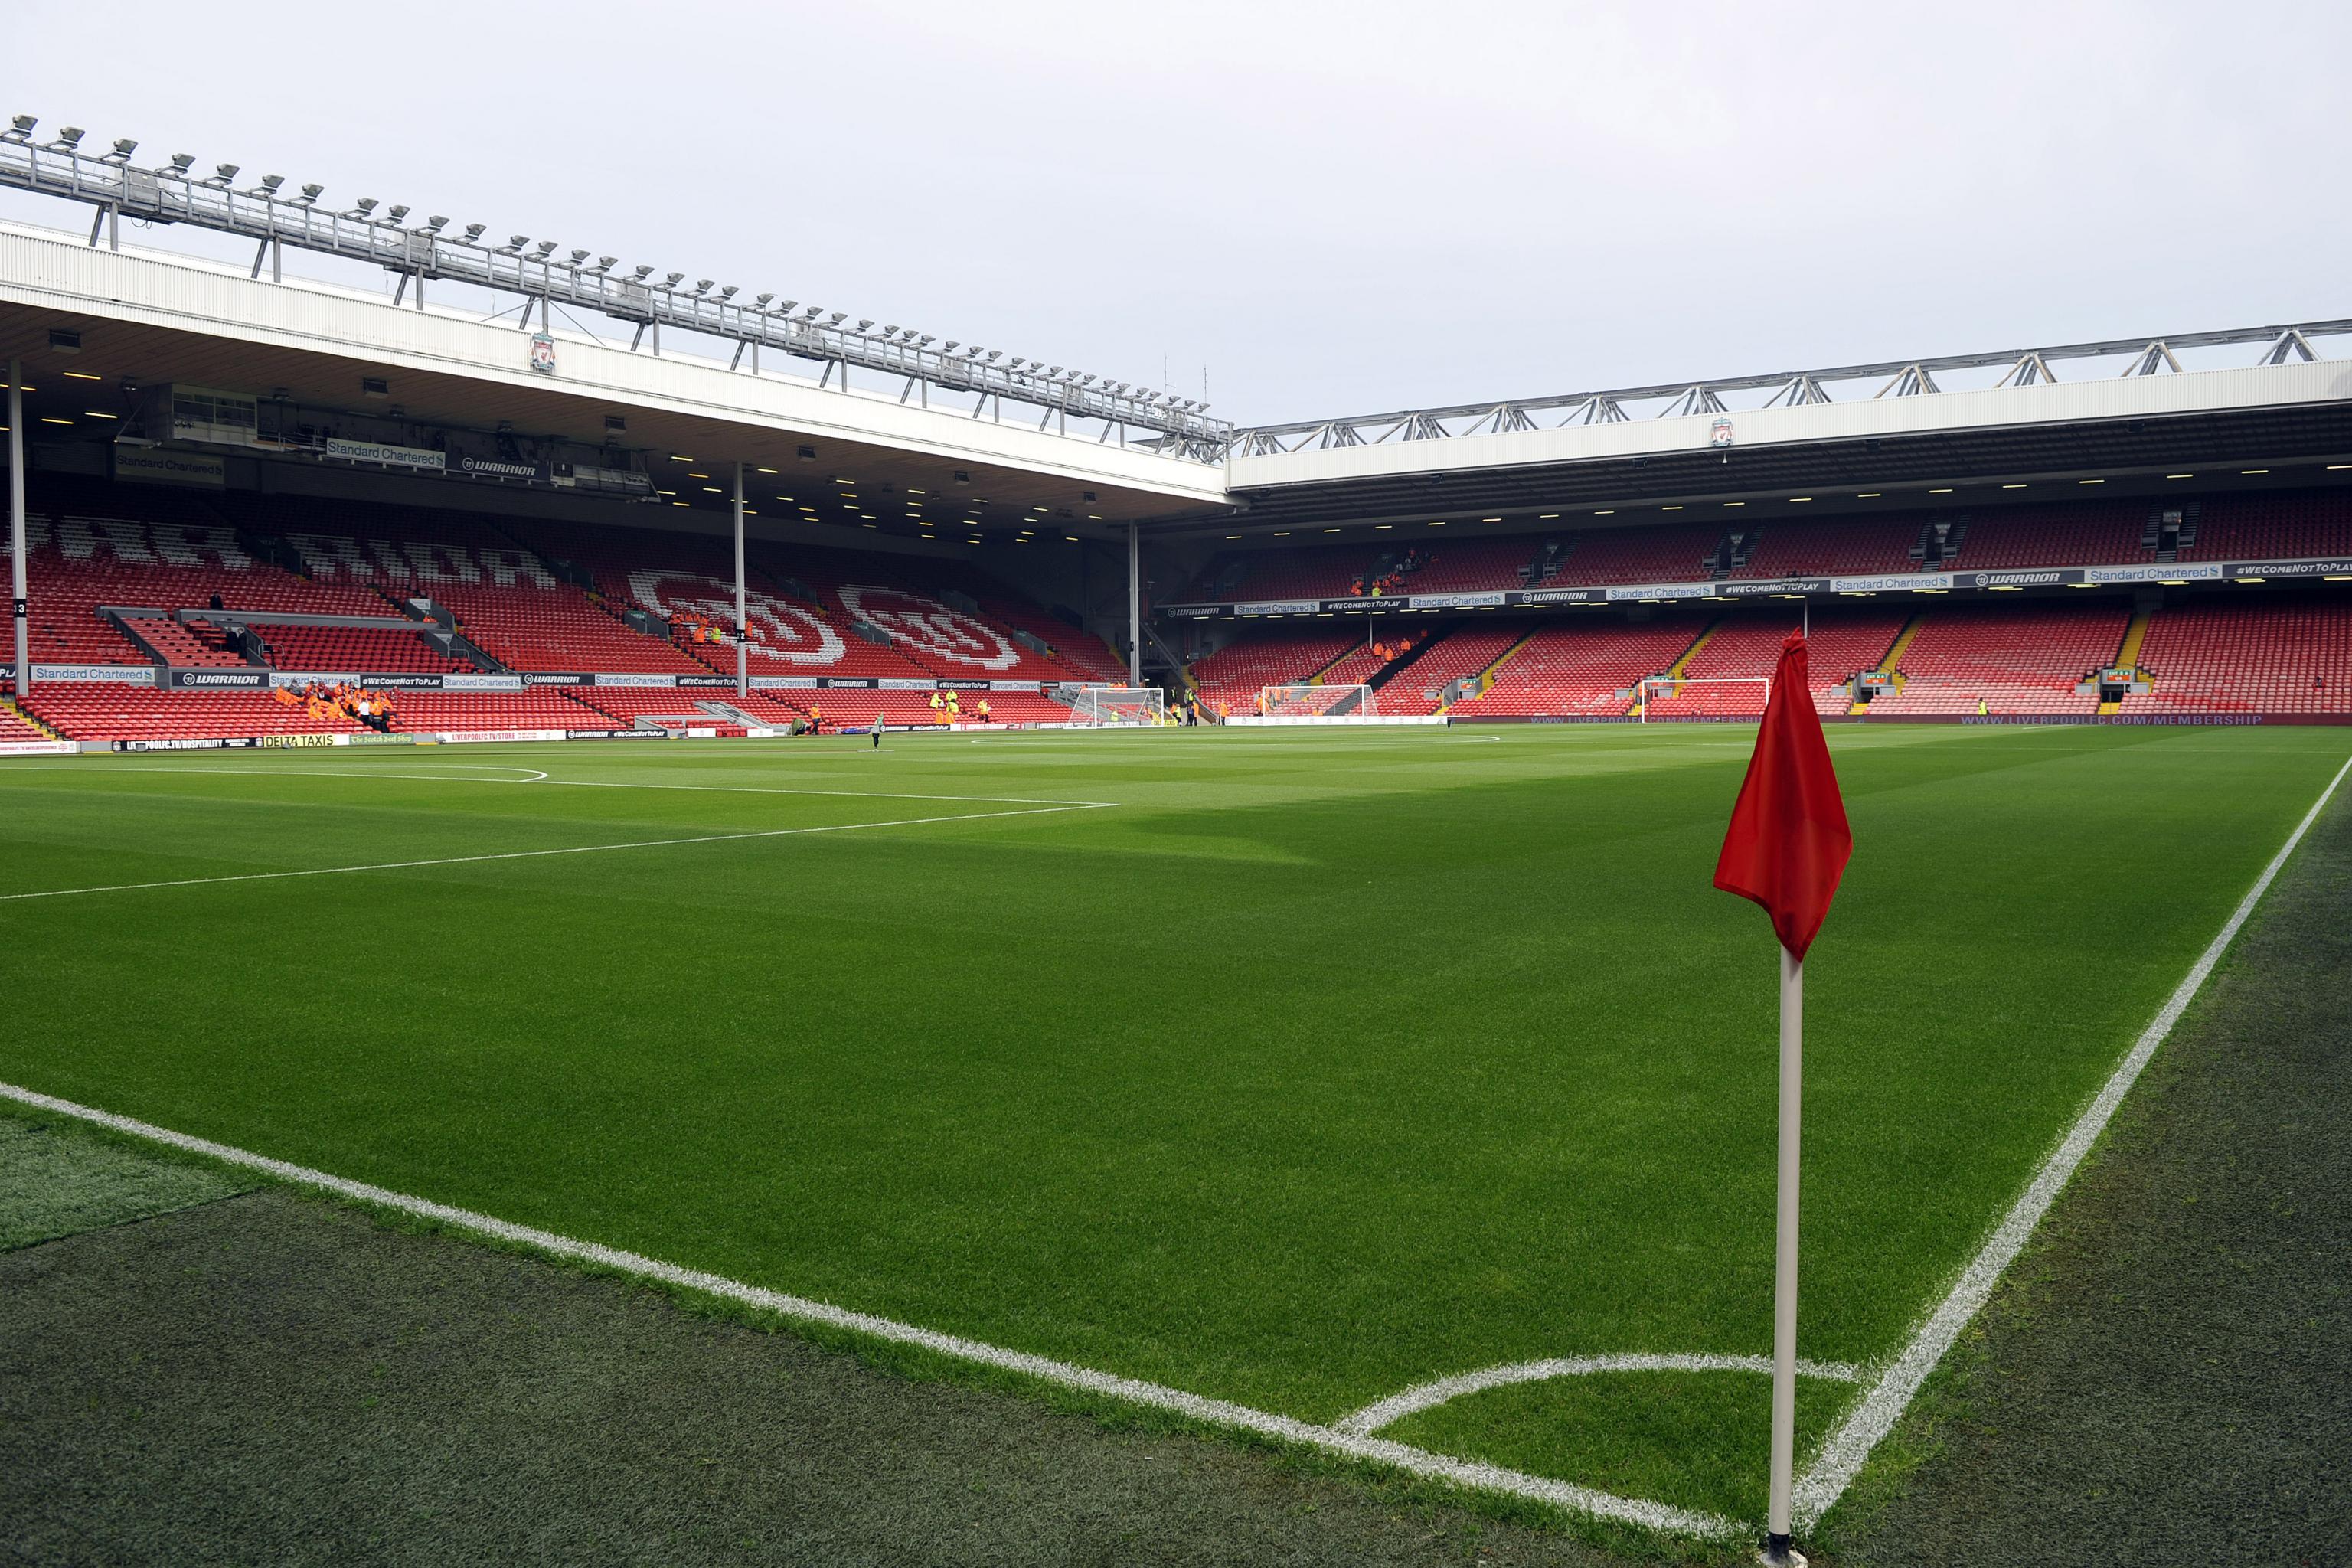 Anfield S Redevelopment Is Vital For Liverpool S Success Bleacher Report Latest News Videos And Highlights